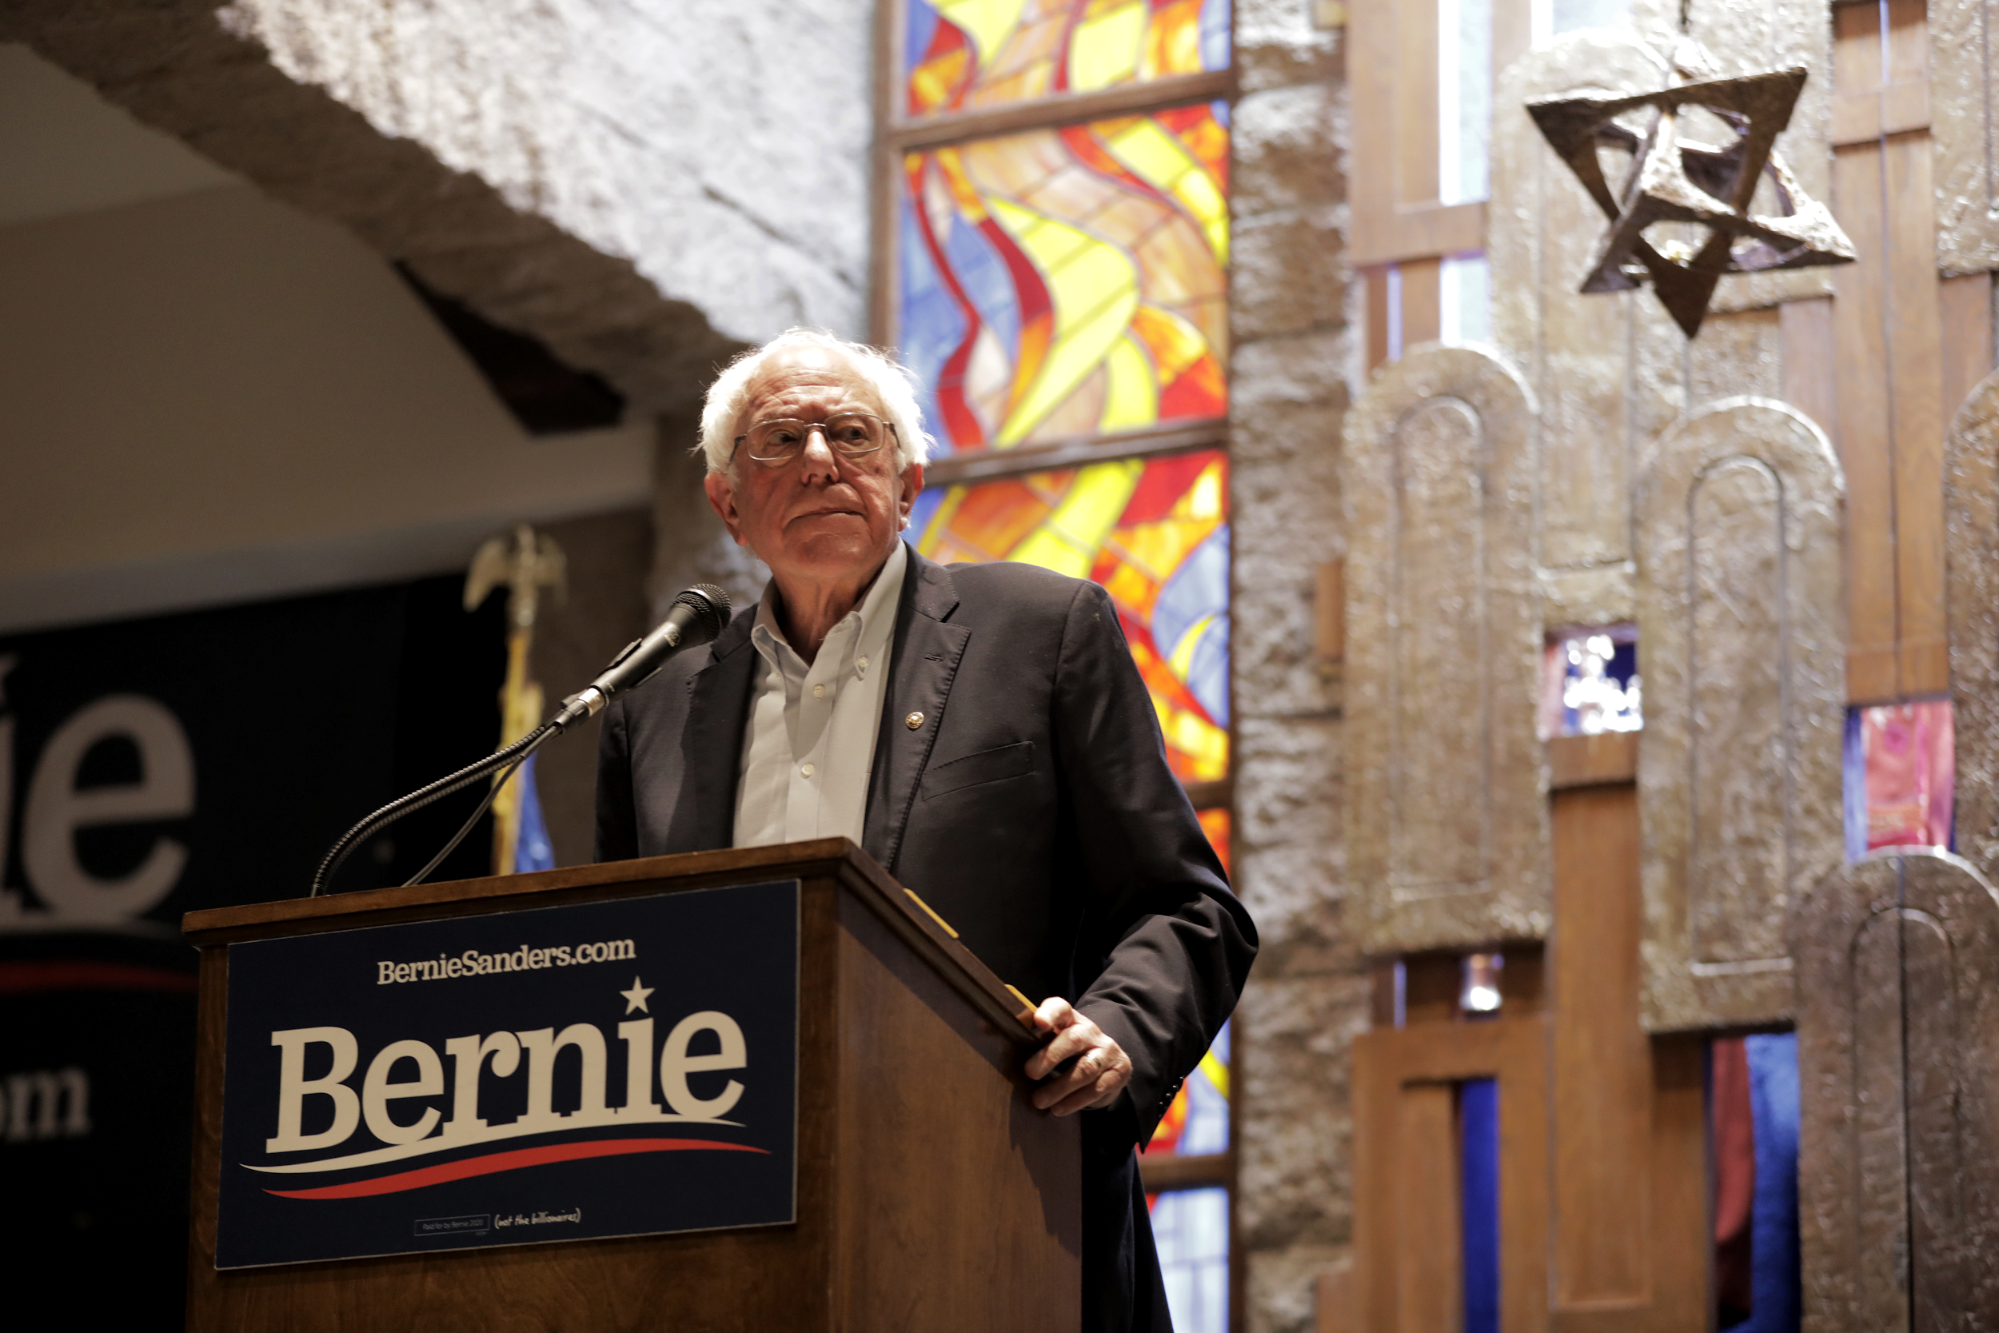 Bernie speaking at podium in front of 350-year old Torah recovered from Poland during the Holocaust